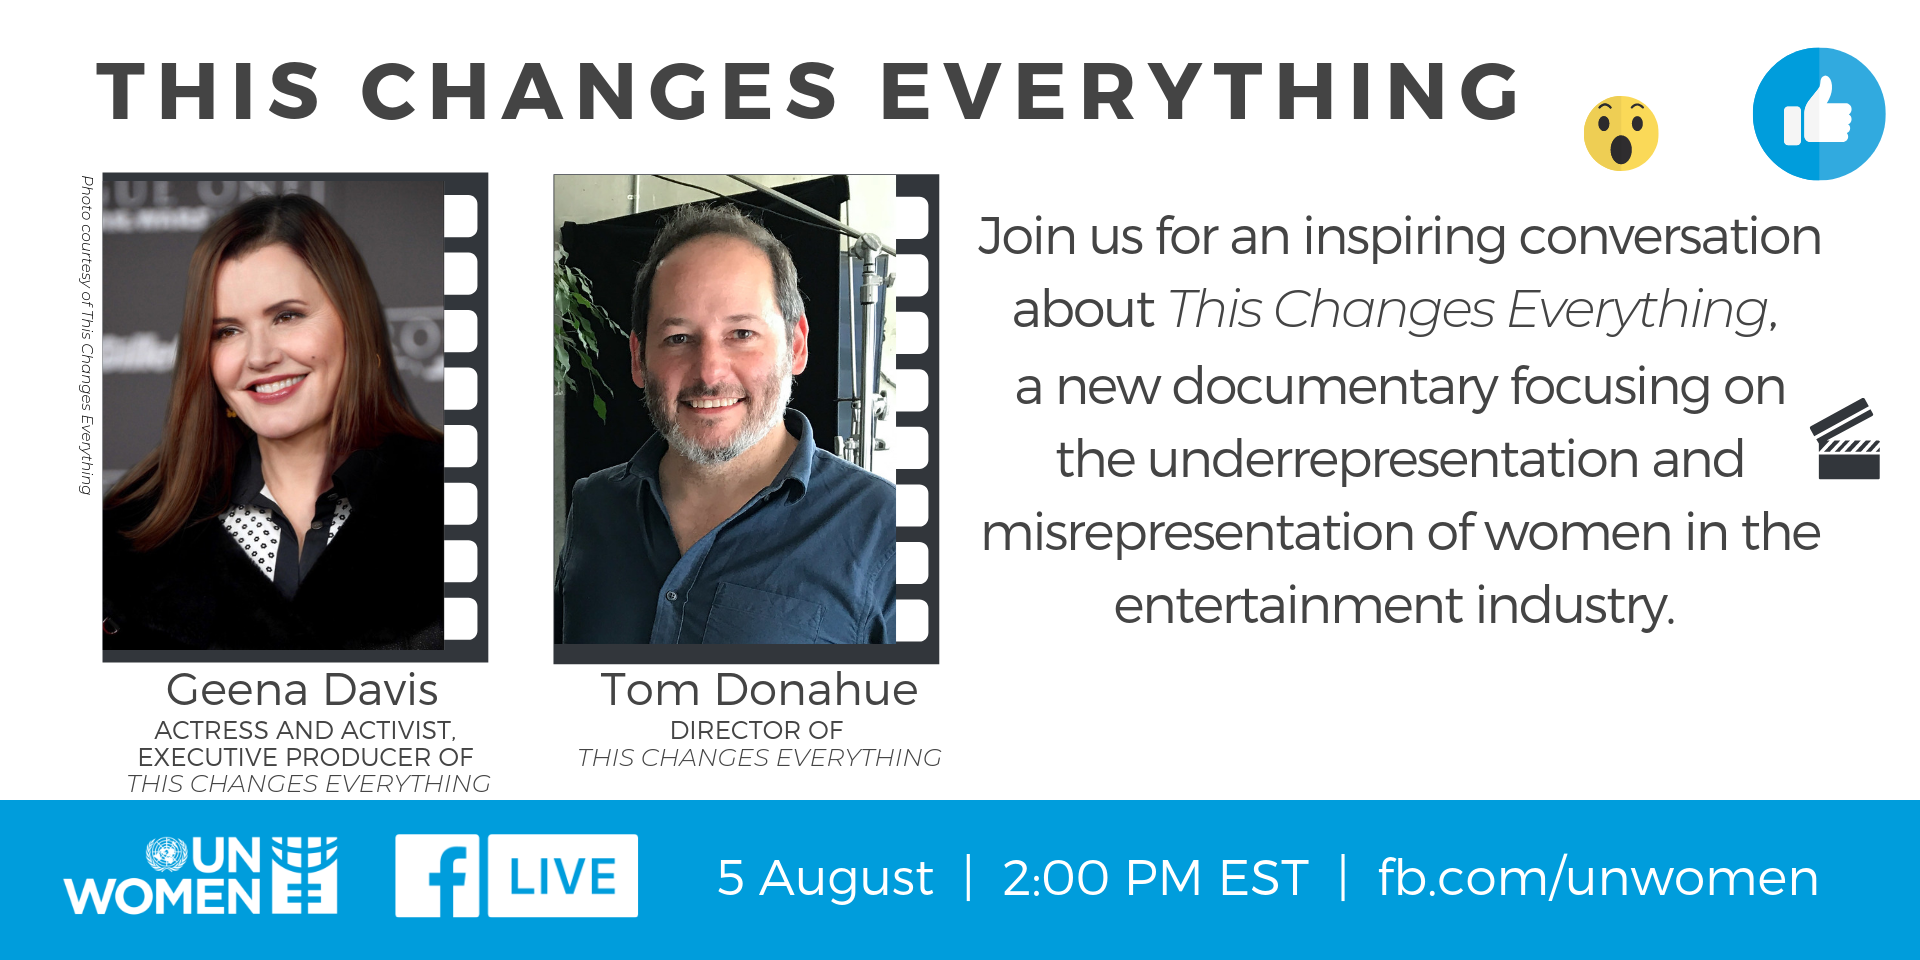 Join us for an inspiring conversation about This Changes Everything, a new film focusing on the underrepresentation and missrepresentation of women in the entertainment industry